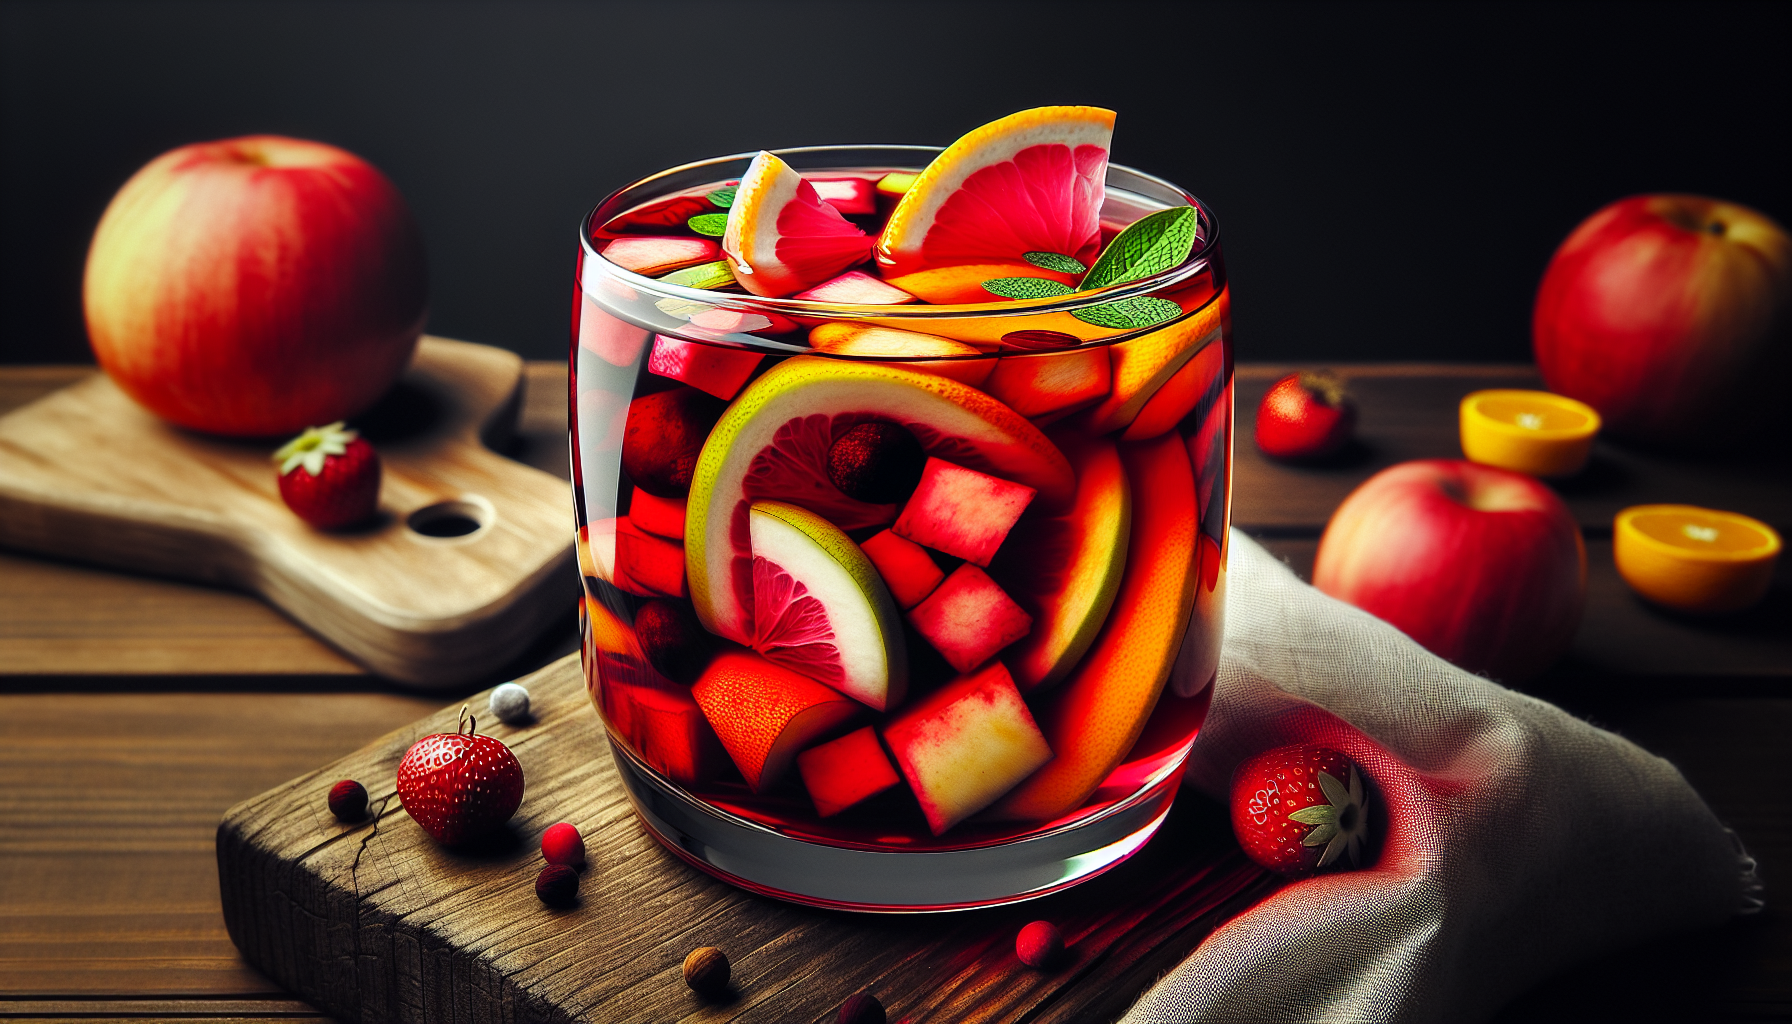 Whats Your Favorite Way To Enjoy Kompot, The Russian Fruit Punch/drink?